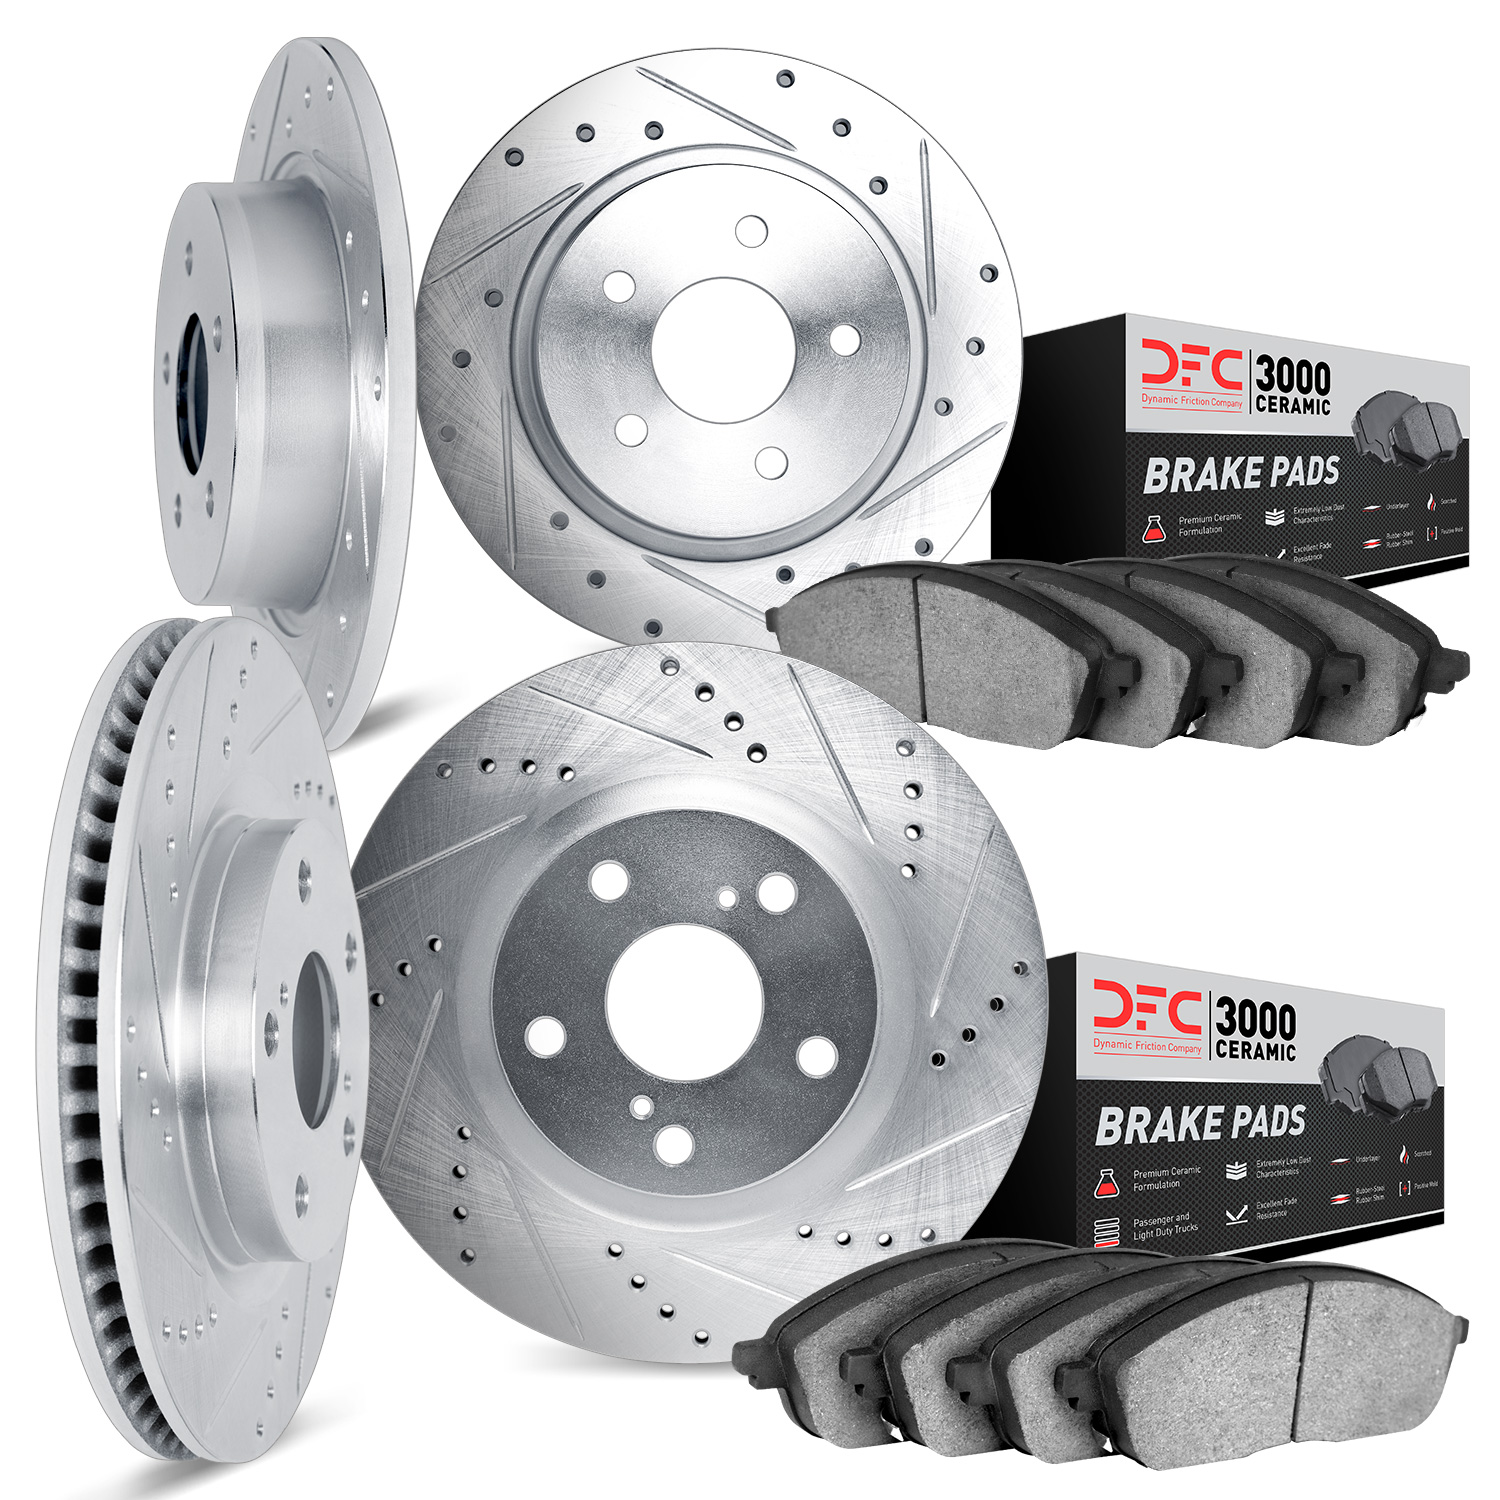 7304-80023 Drilled/Slotted Brake Rotor with 3000-Series Ceramic Brake Pads Kit [Silver], 2007-2013 Ford/Lincoln/Mercury/Mazda, P